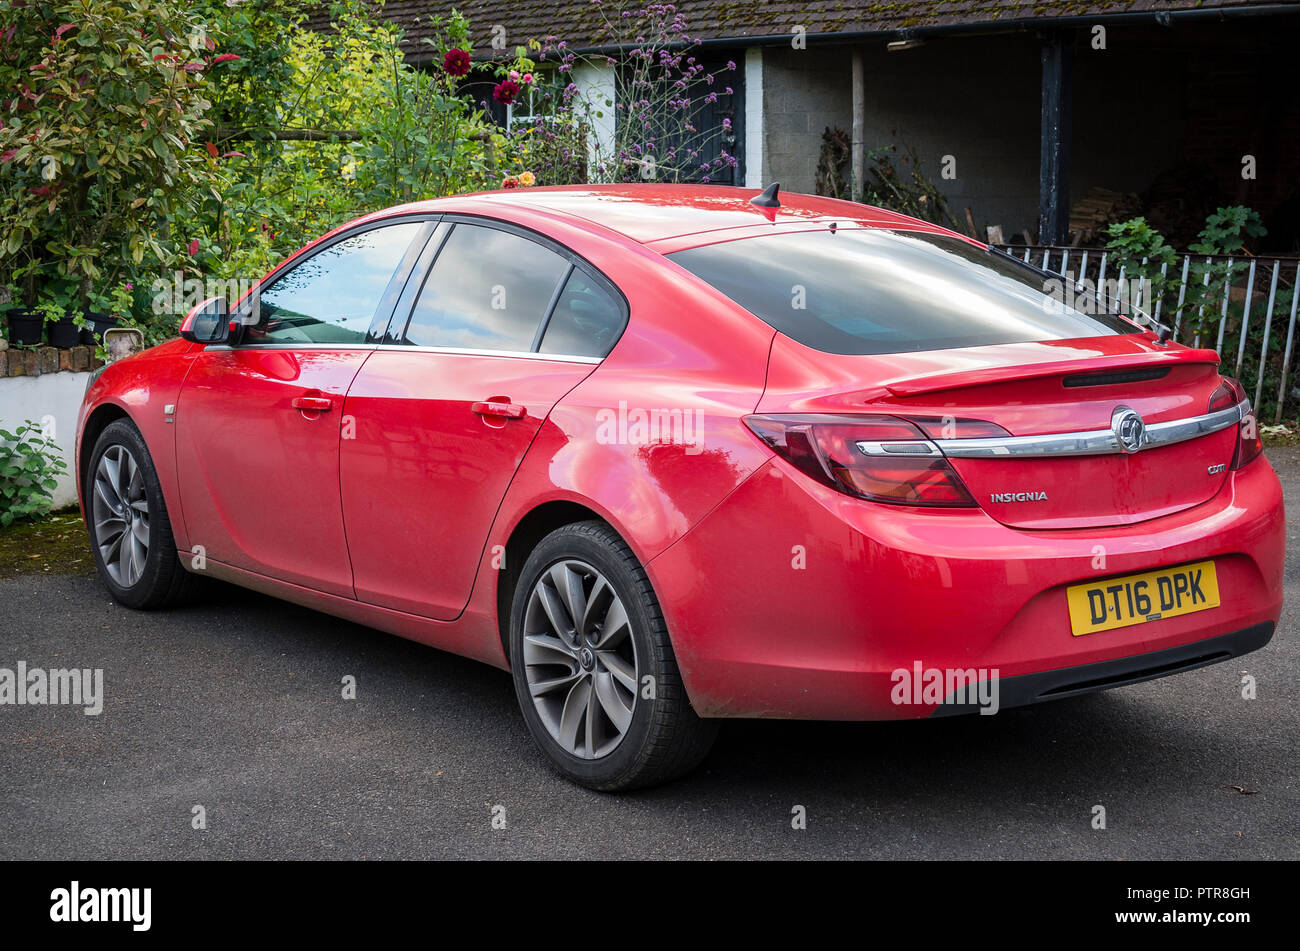 Red Vauxhall Insignia SRi cdi saloon car showing three quarter rear  near-side view in UK Stock Photo - Alamy